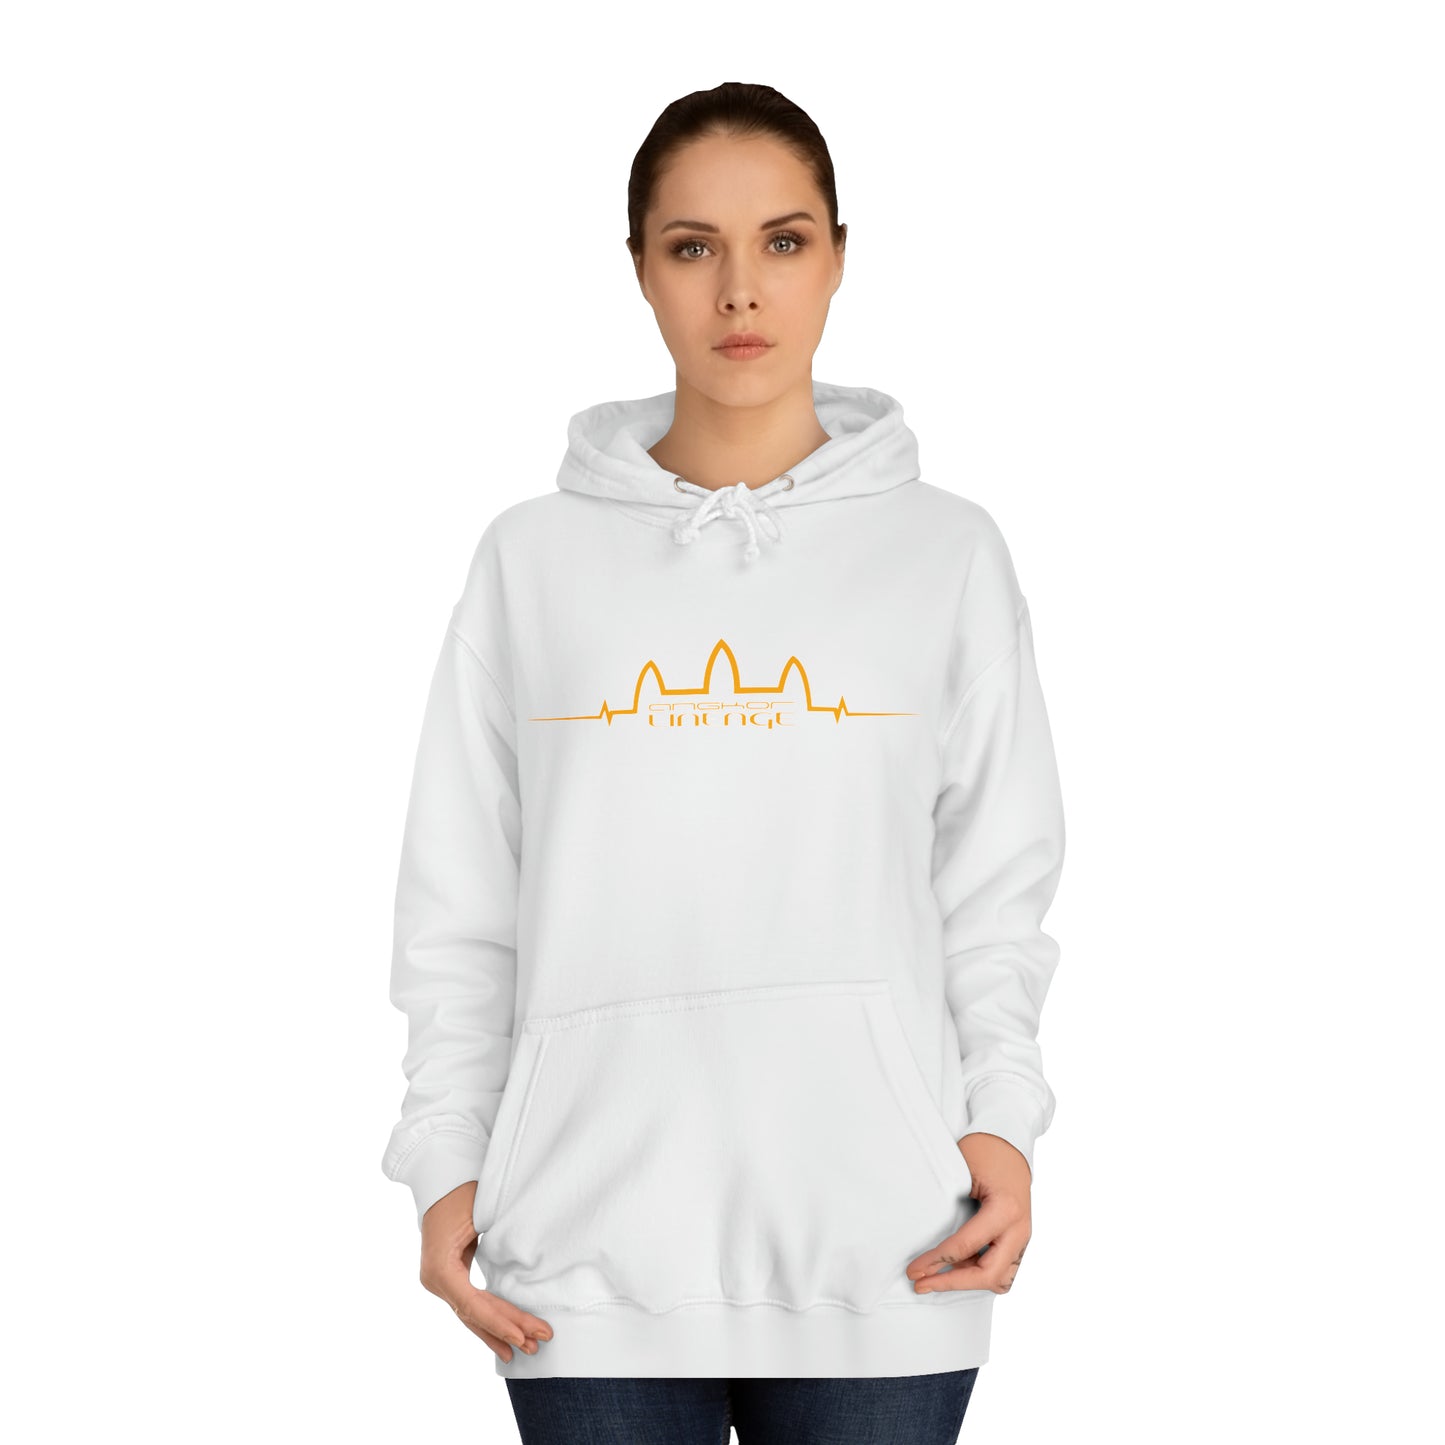 Angkor Lineage Unisex College Hoodie